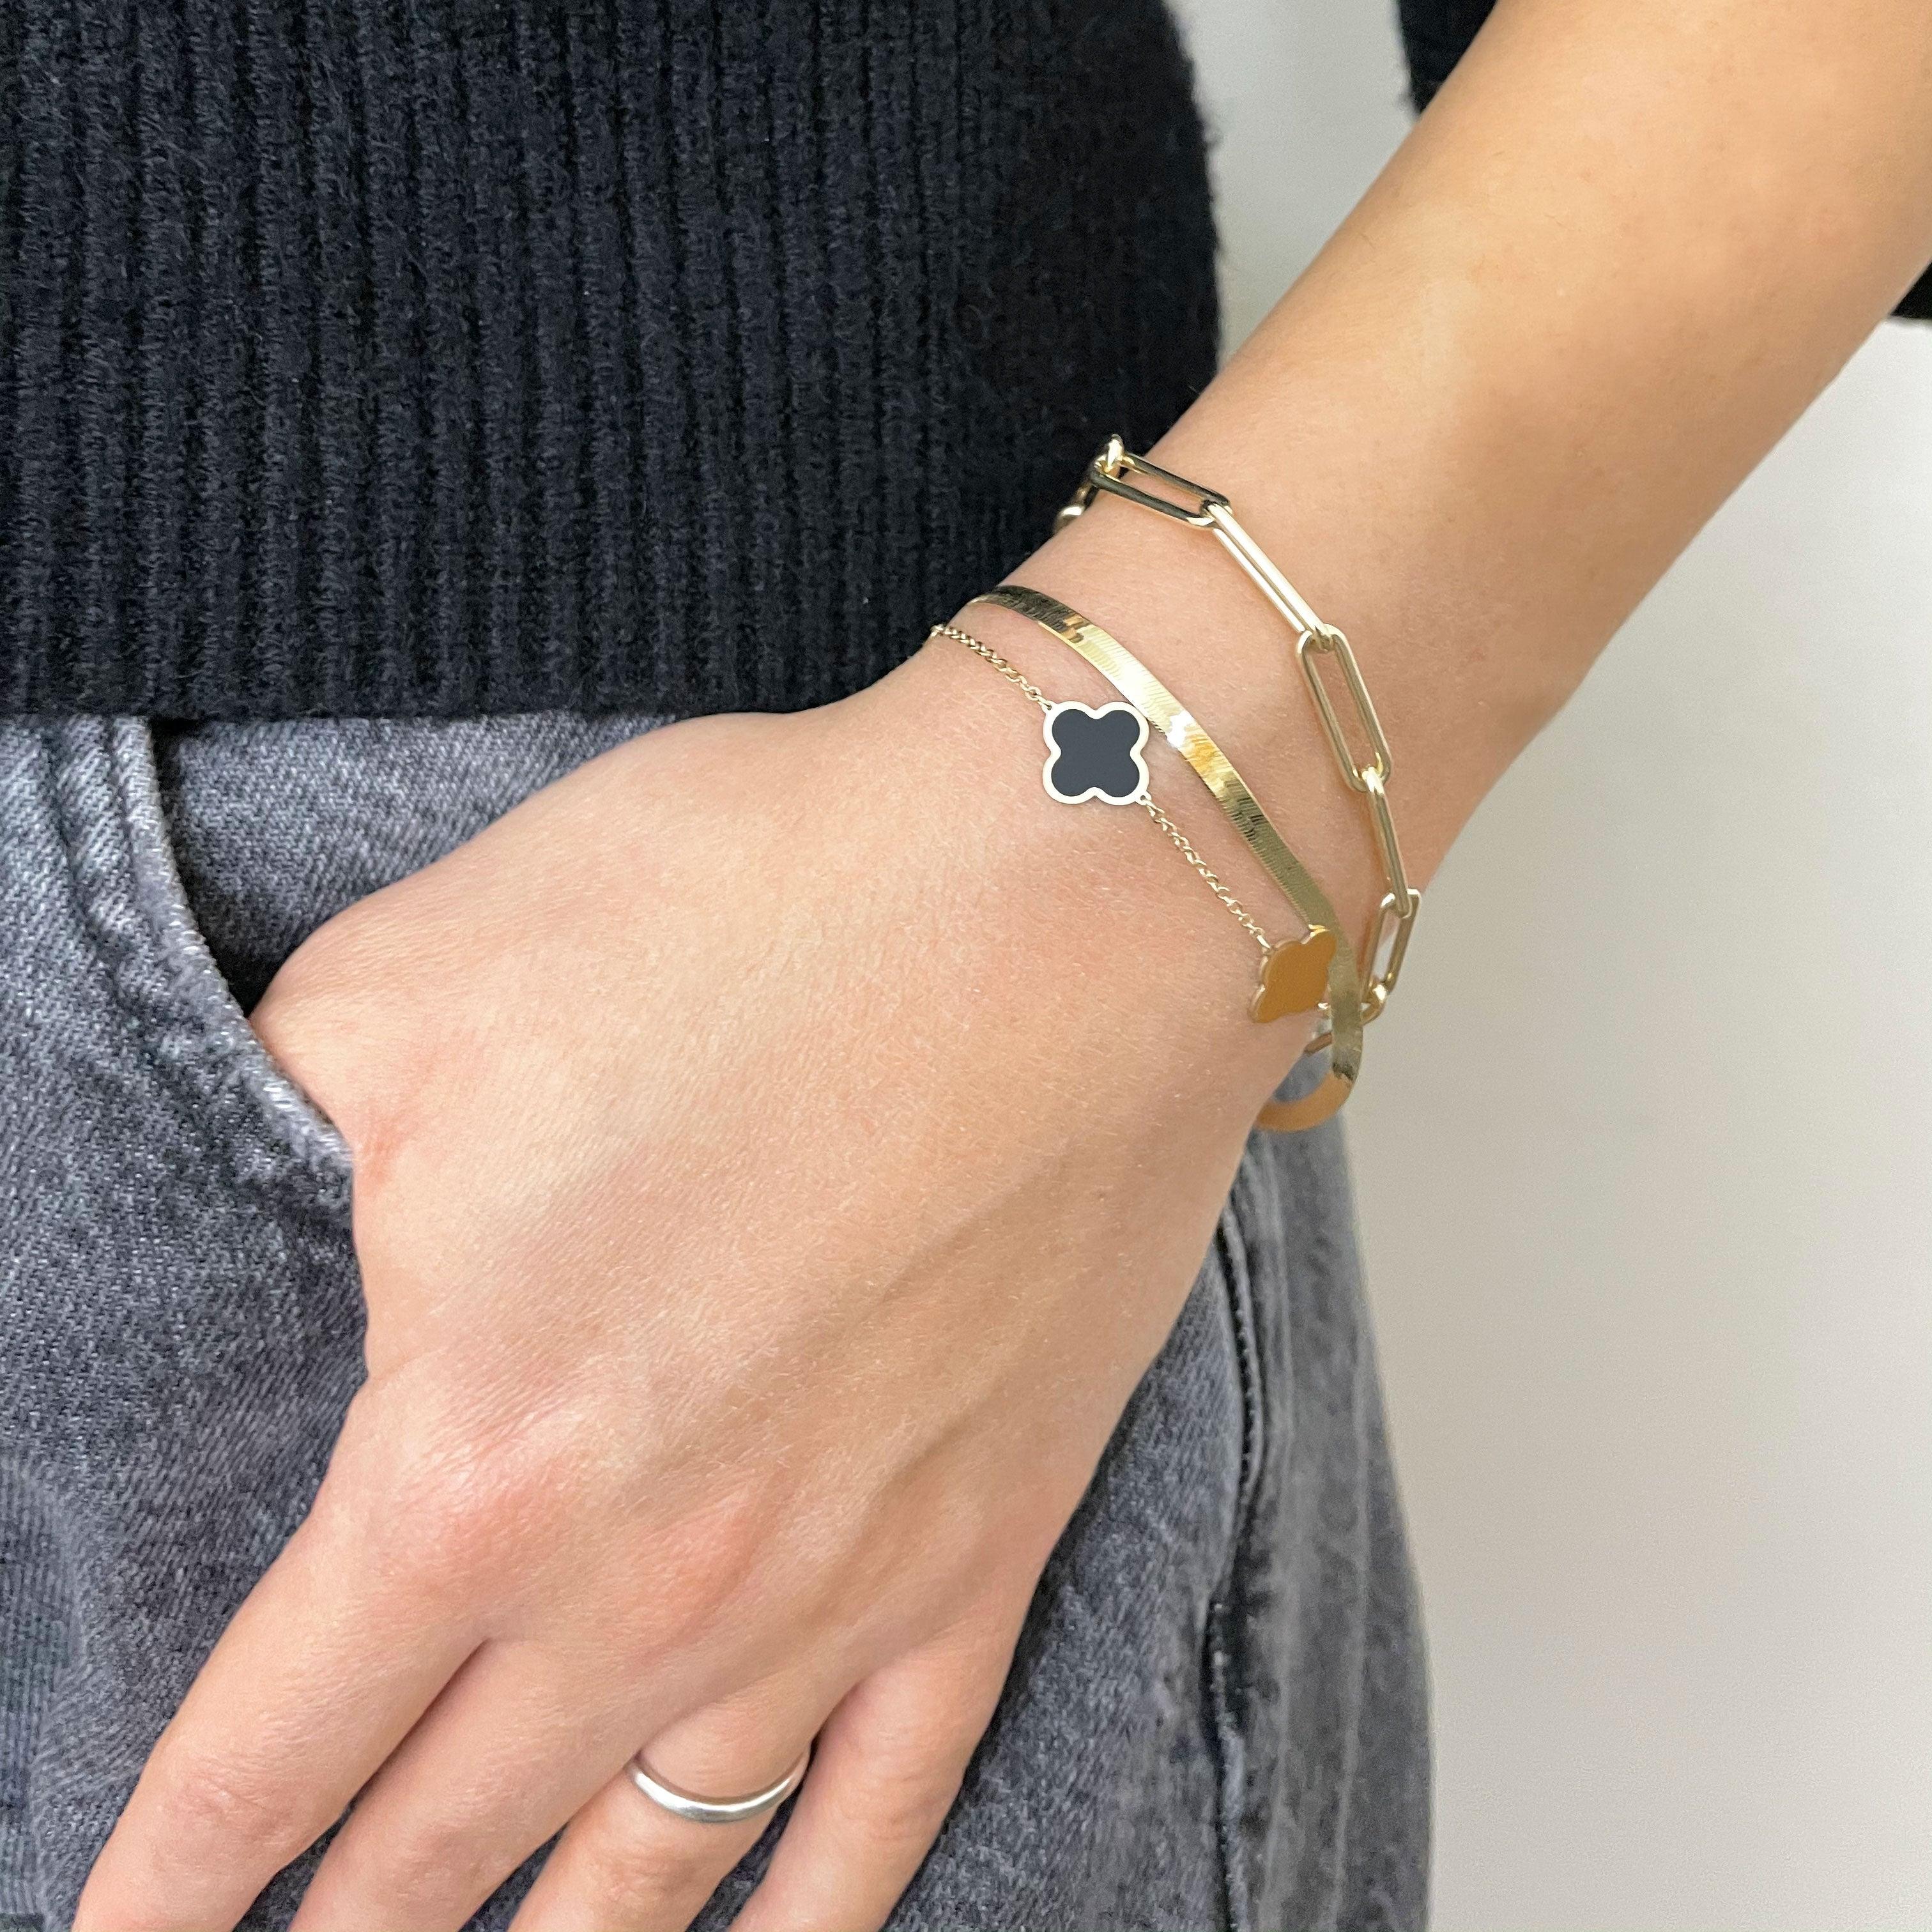 The herringbone bracelet is the perfect lightweight, everyday addition to bring together any outfit. Be sure to stack it for an elevated look!

14K Yellow Gold

Chain Length: 7 inches

Measures: 3 millimeters

Please note that herringbone chains are